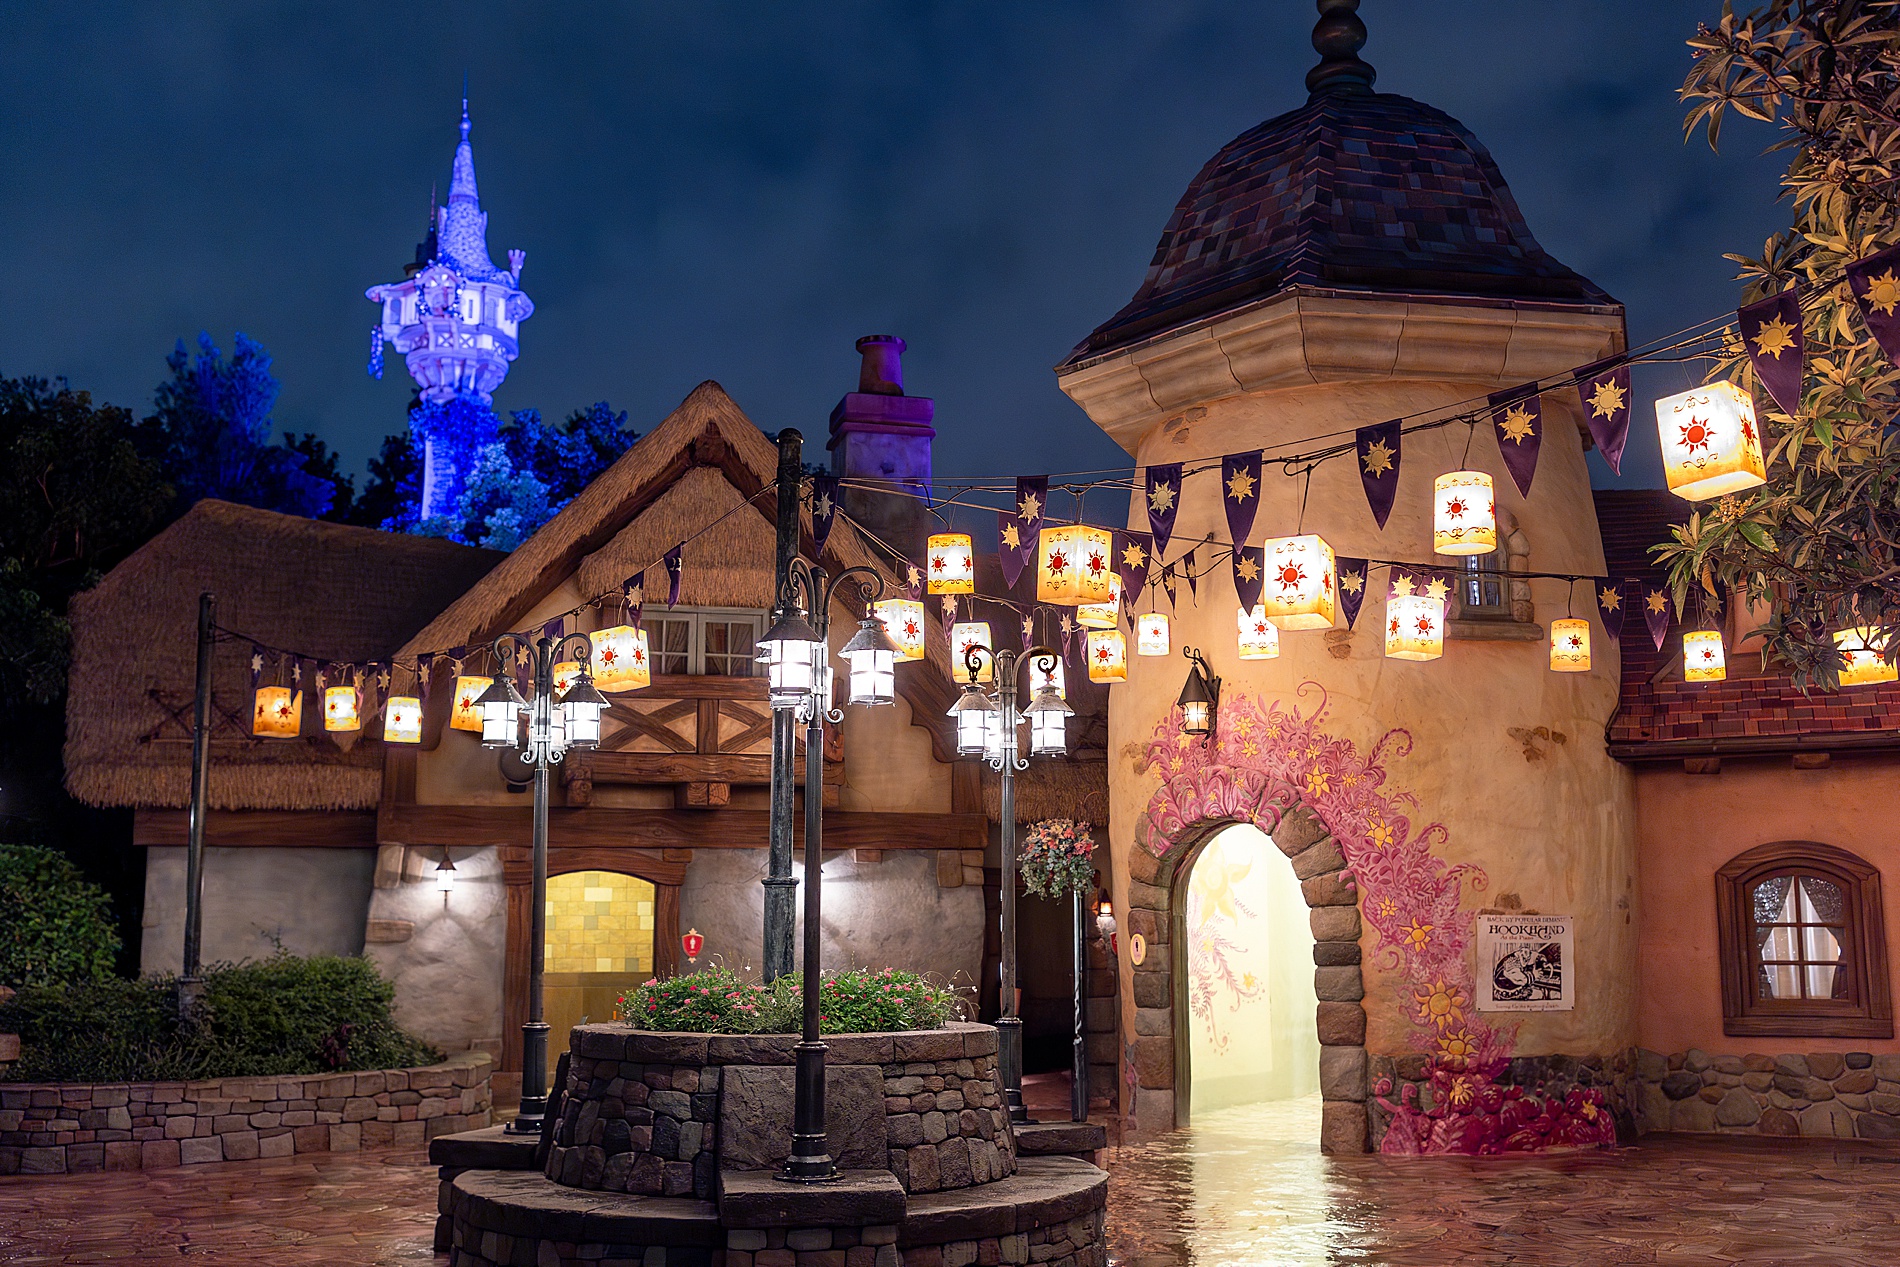 tangled themed building with lanterns lit up at night